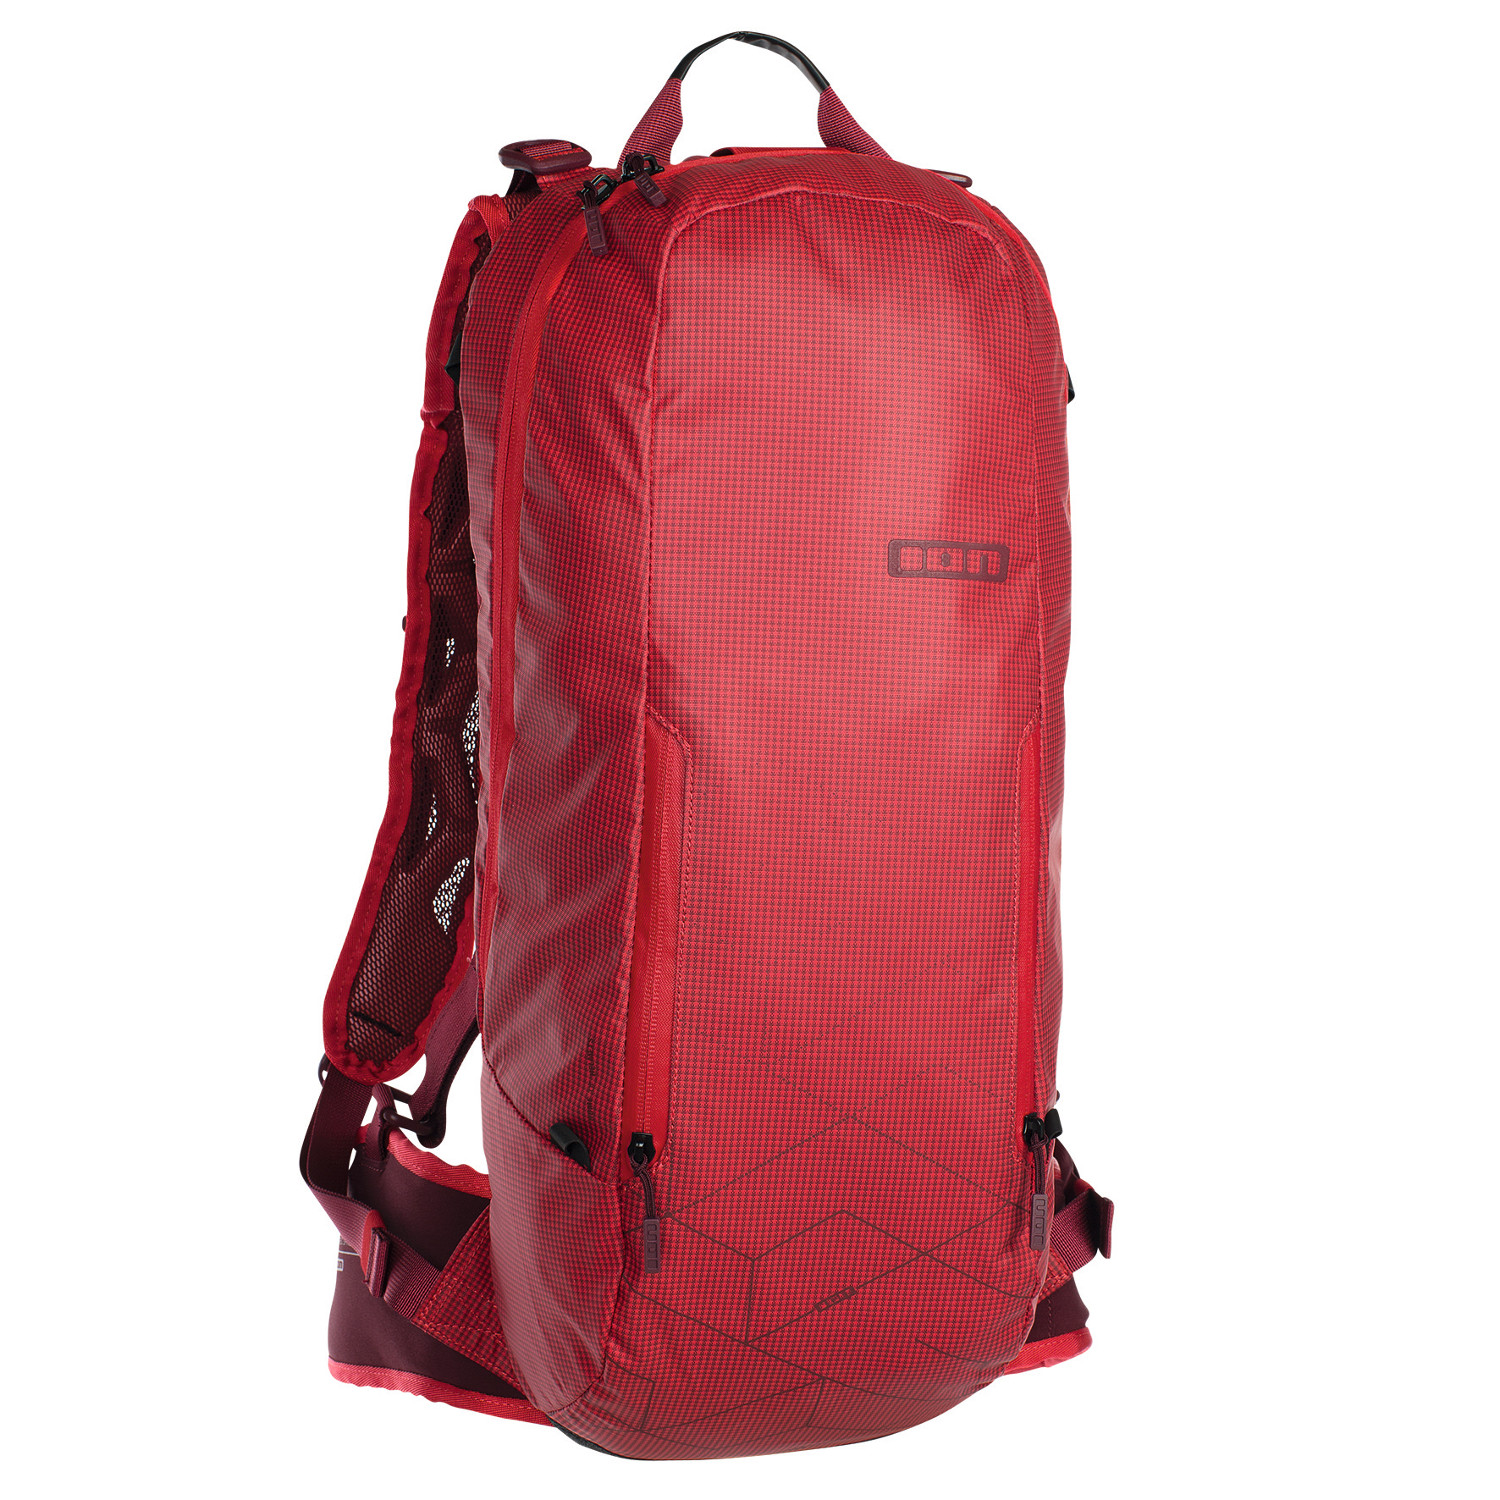 ION Backpack with Hydration System Compartment Rampart 8 Blazing Red